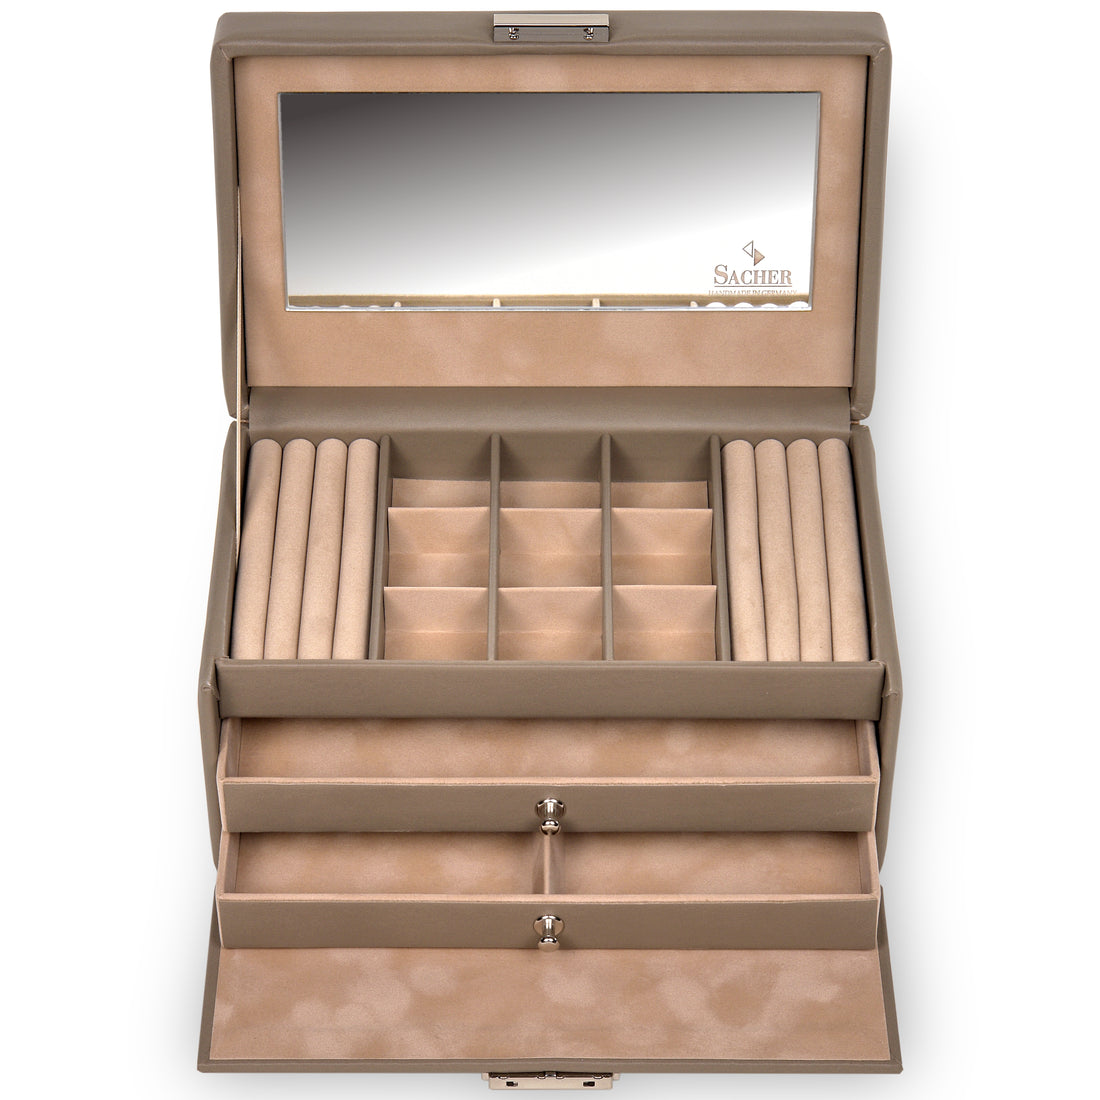 jewellery case Elly nature / taupe (leather)